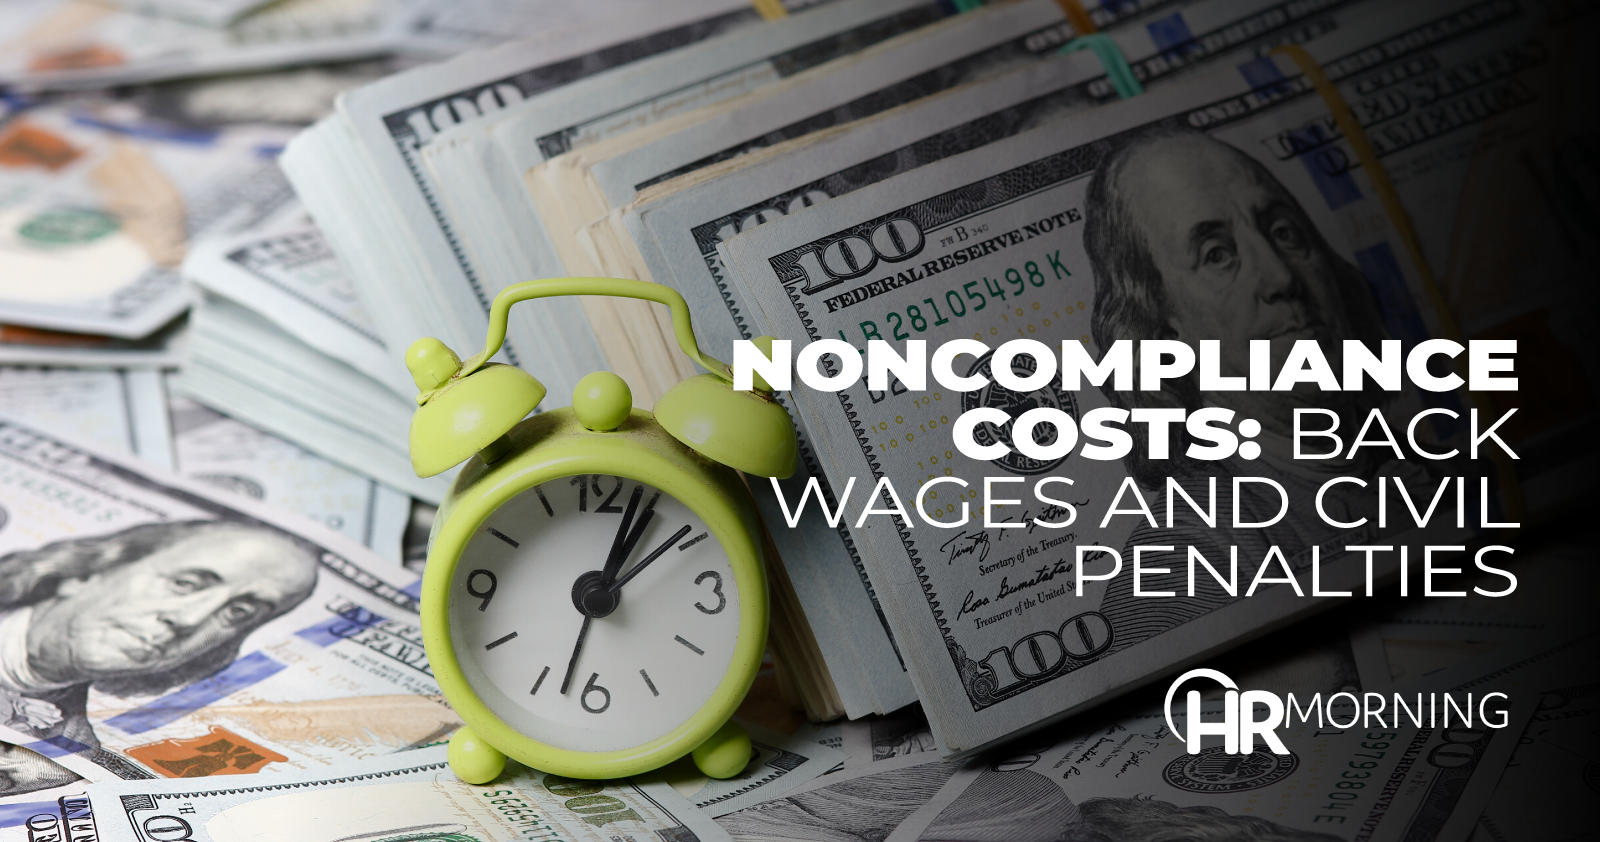 Noncompliance costs: back wages and civil penalties